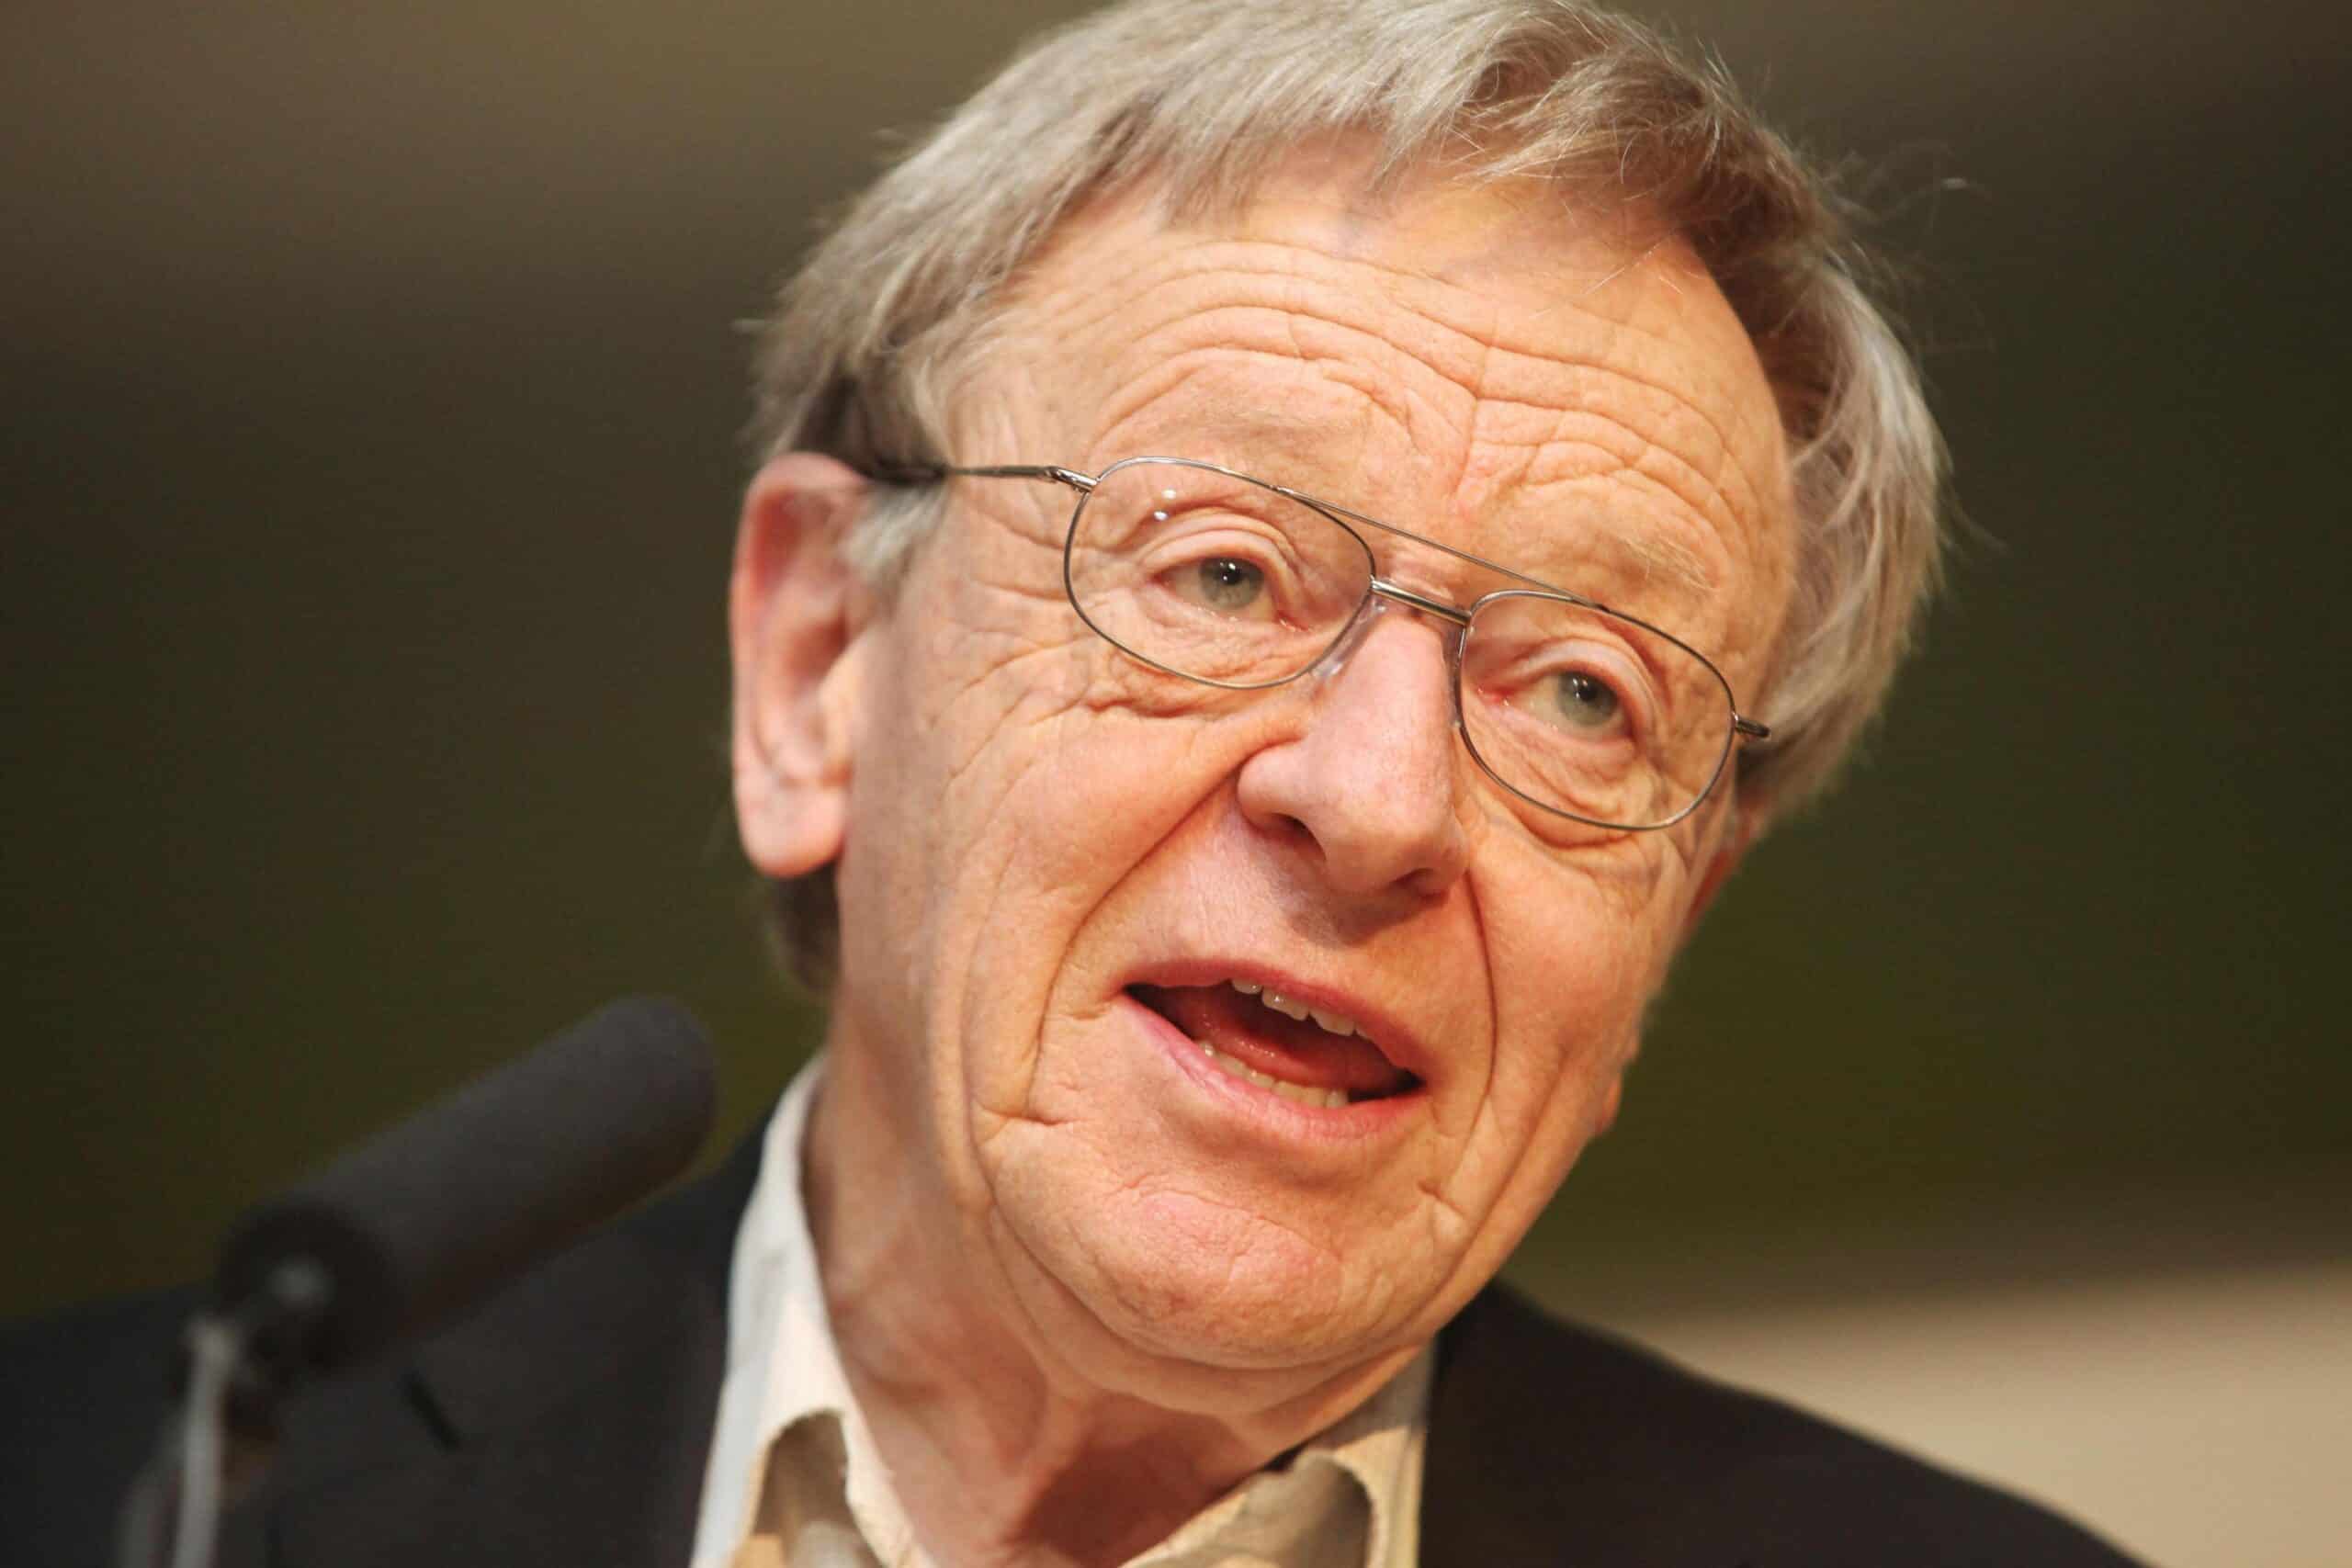 ‘I don’t know why she’s doing it’: Lord Dubs blasts Braverman’s ‘poisonous’ migrant rhetoric